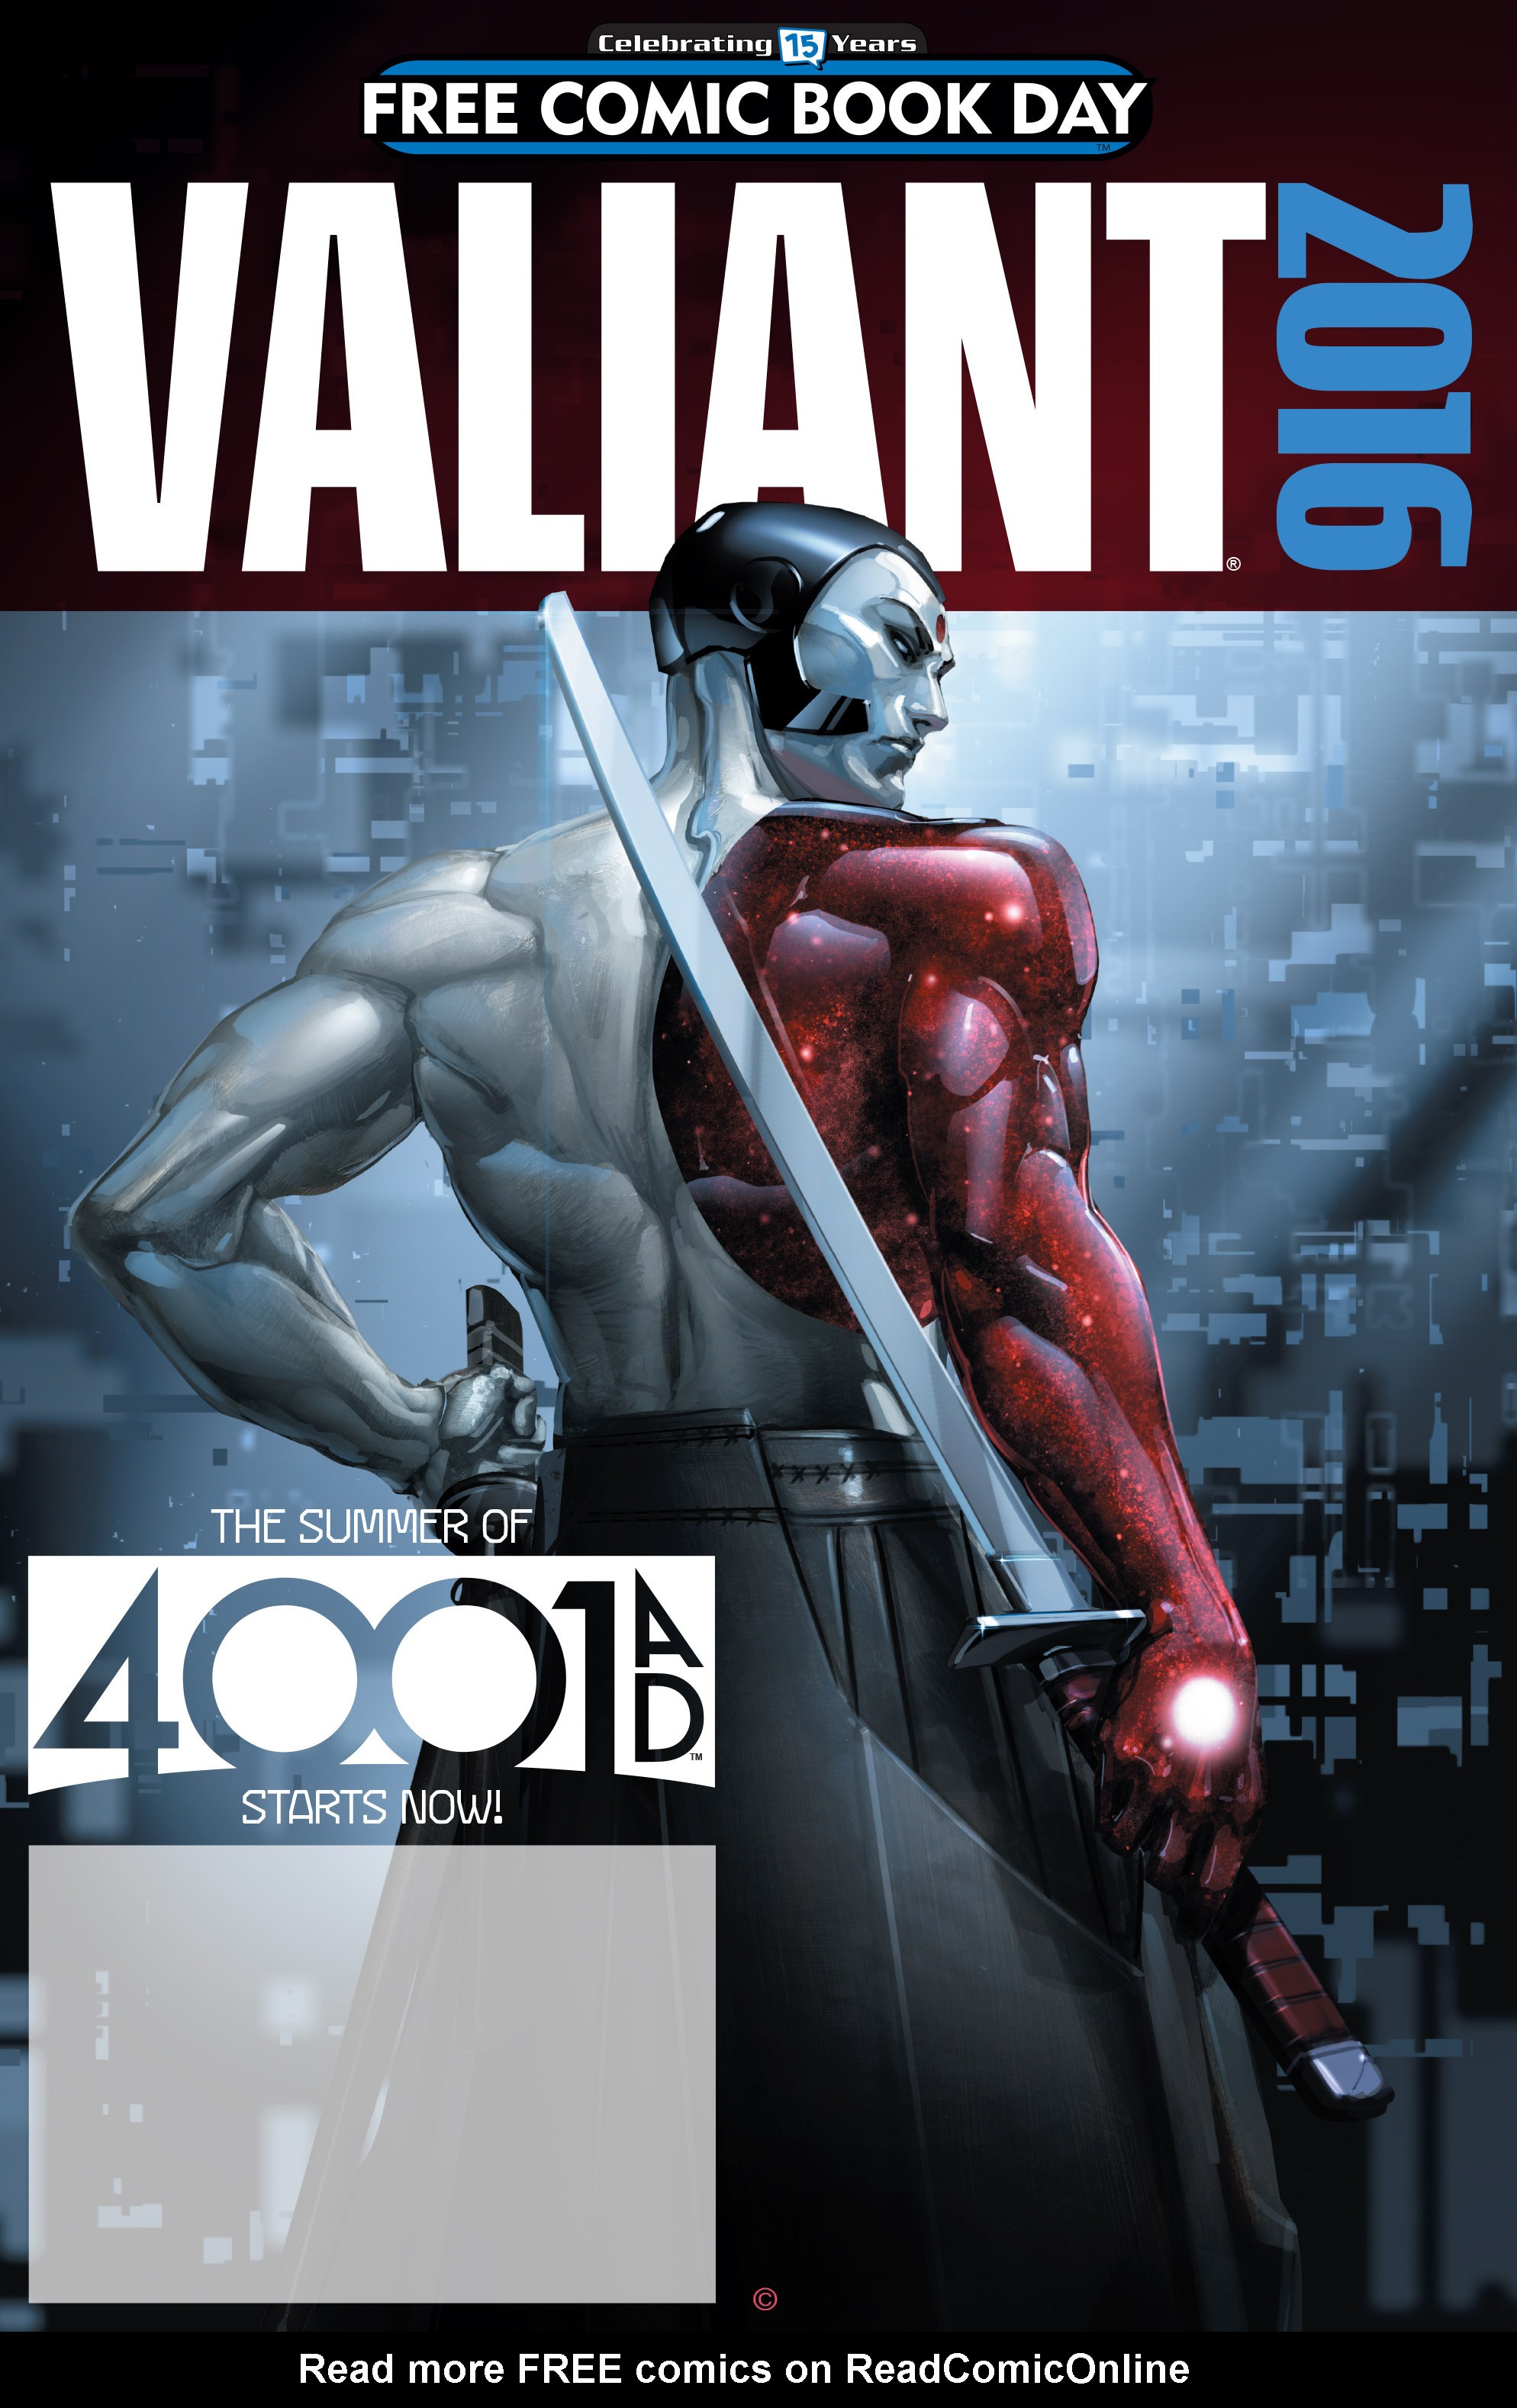 Read online Free Comic Book Day 2016 comic -  Issue # Valiant - 4001 A.D. FCBD Special - 1